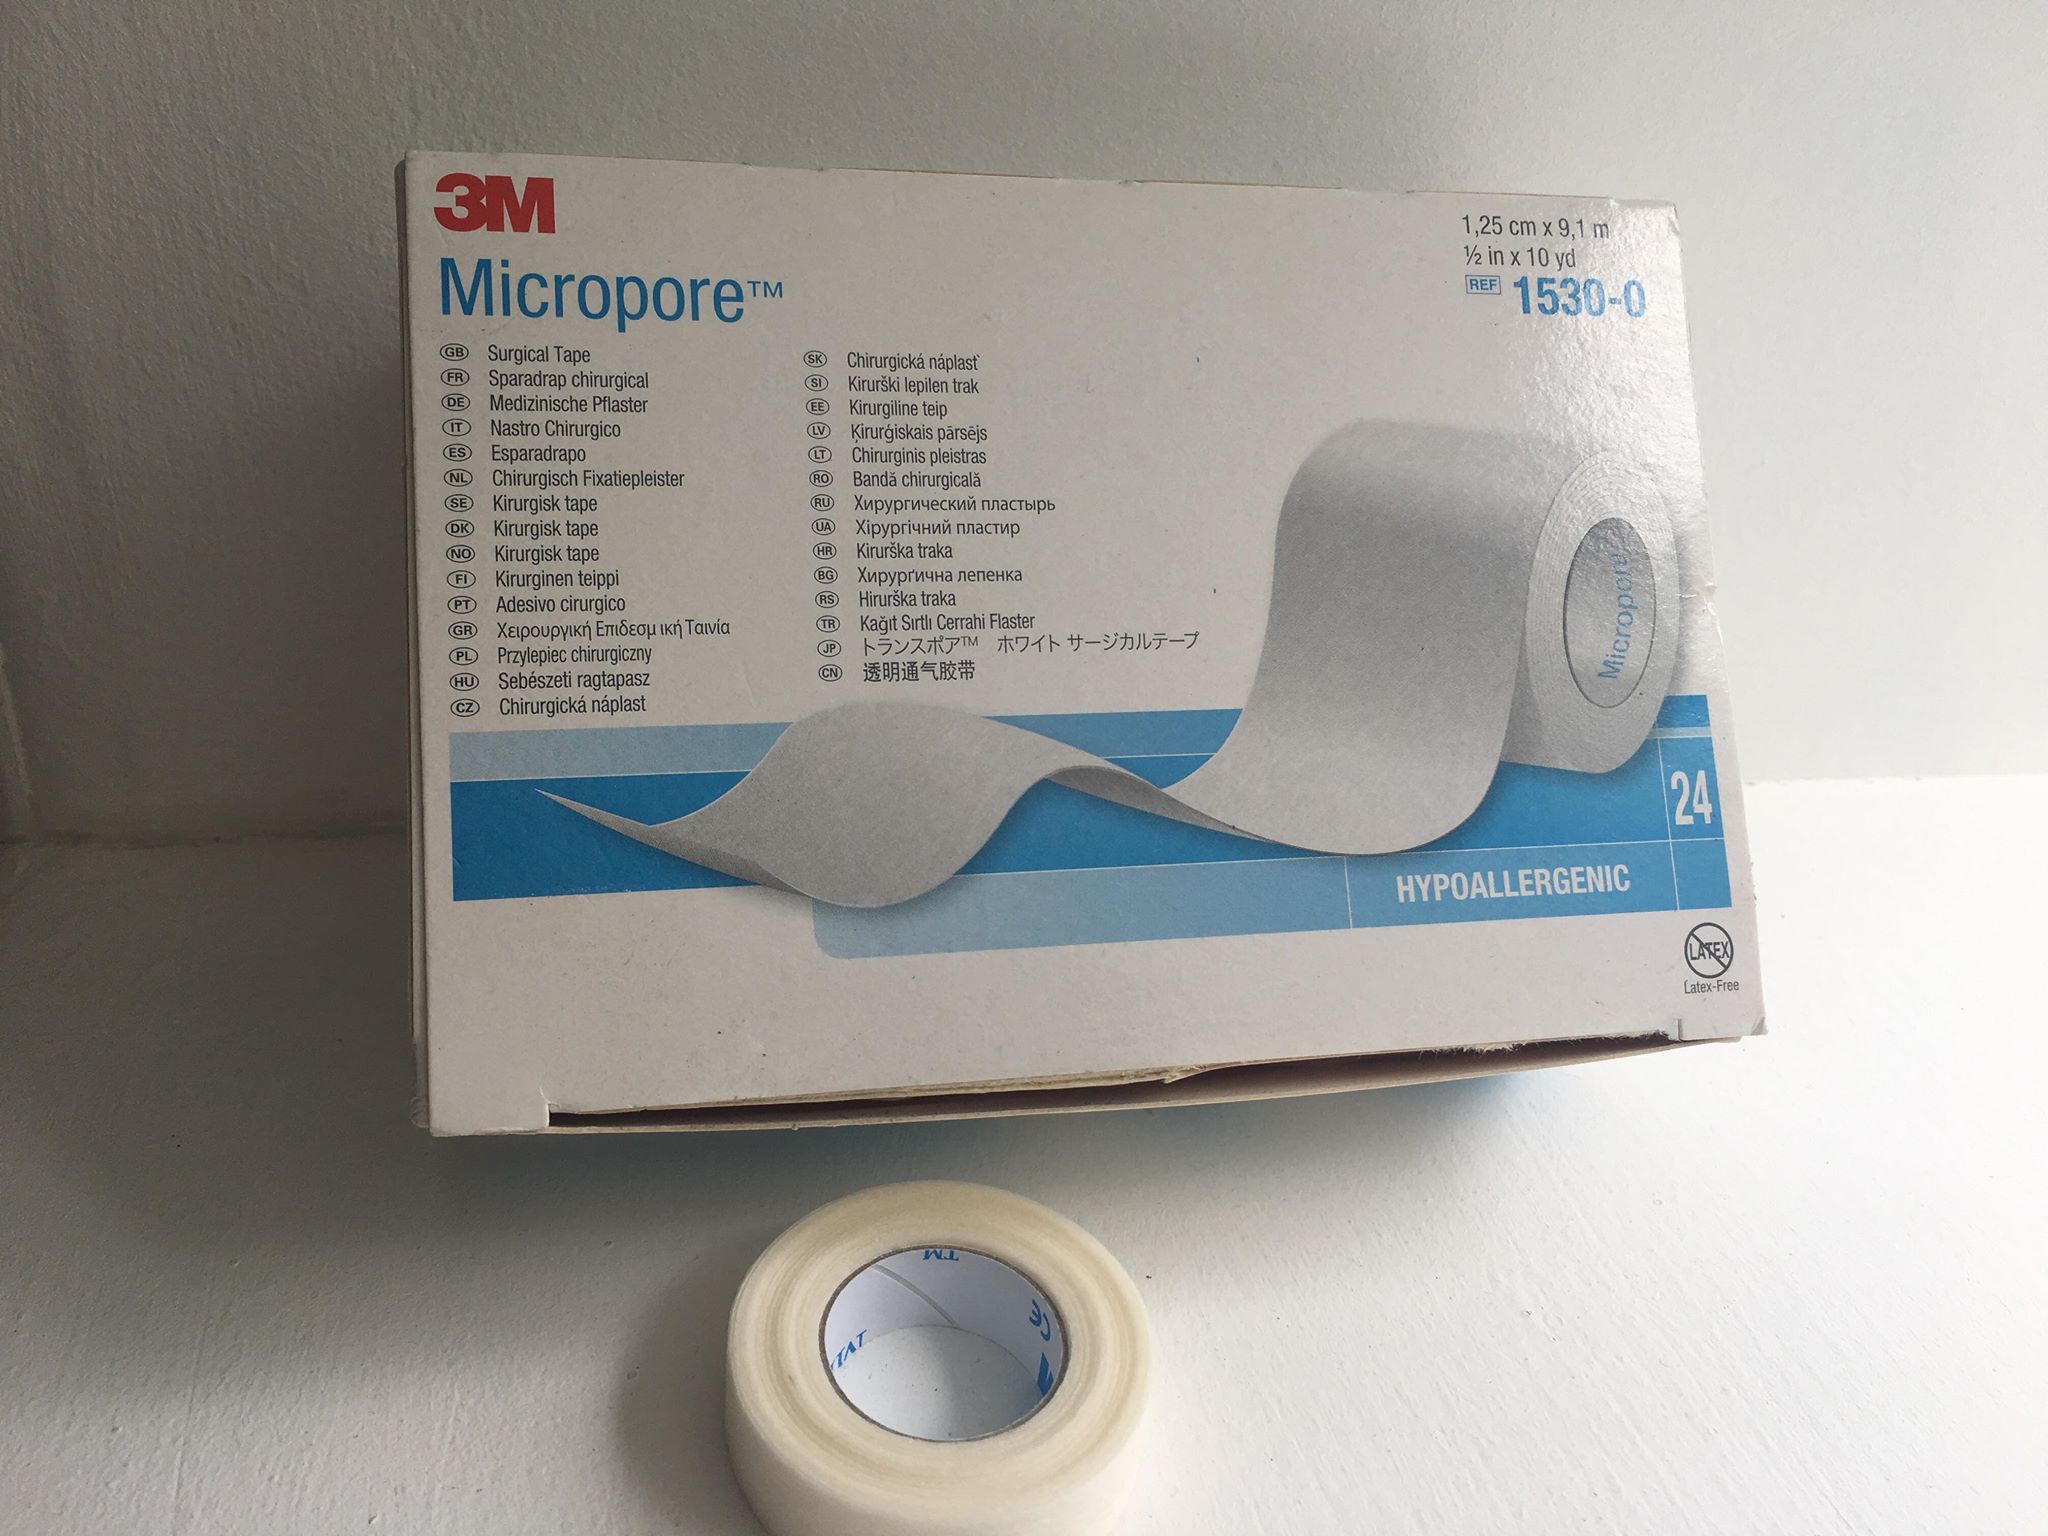 3M Micropore Surgical Tape 1.25cm x 9.14m (Box of 24) - DMS